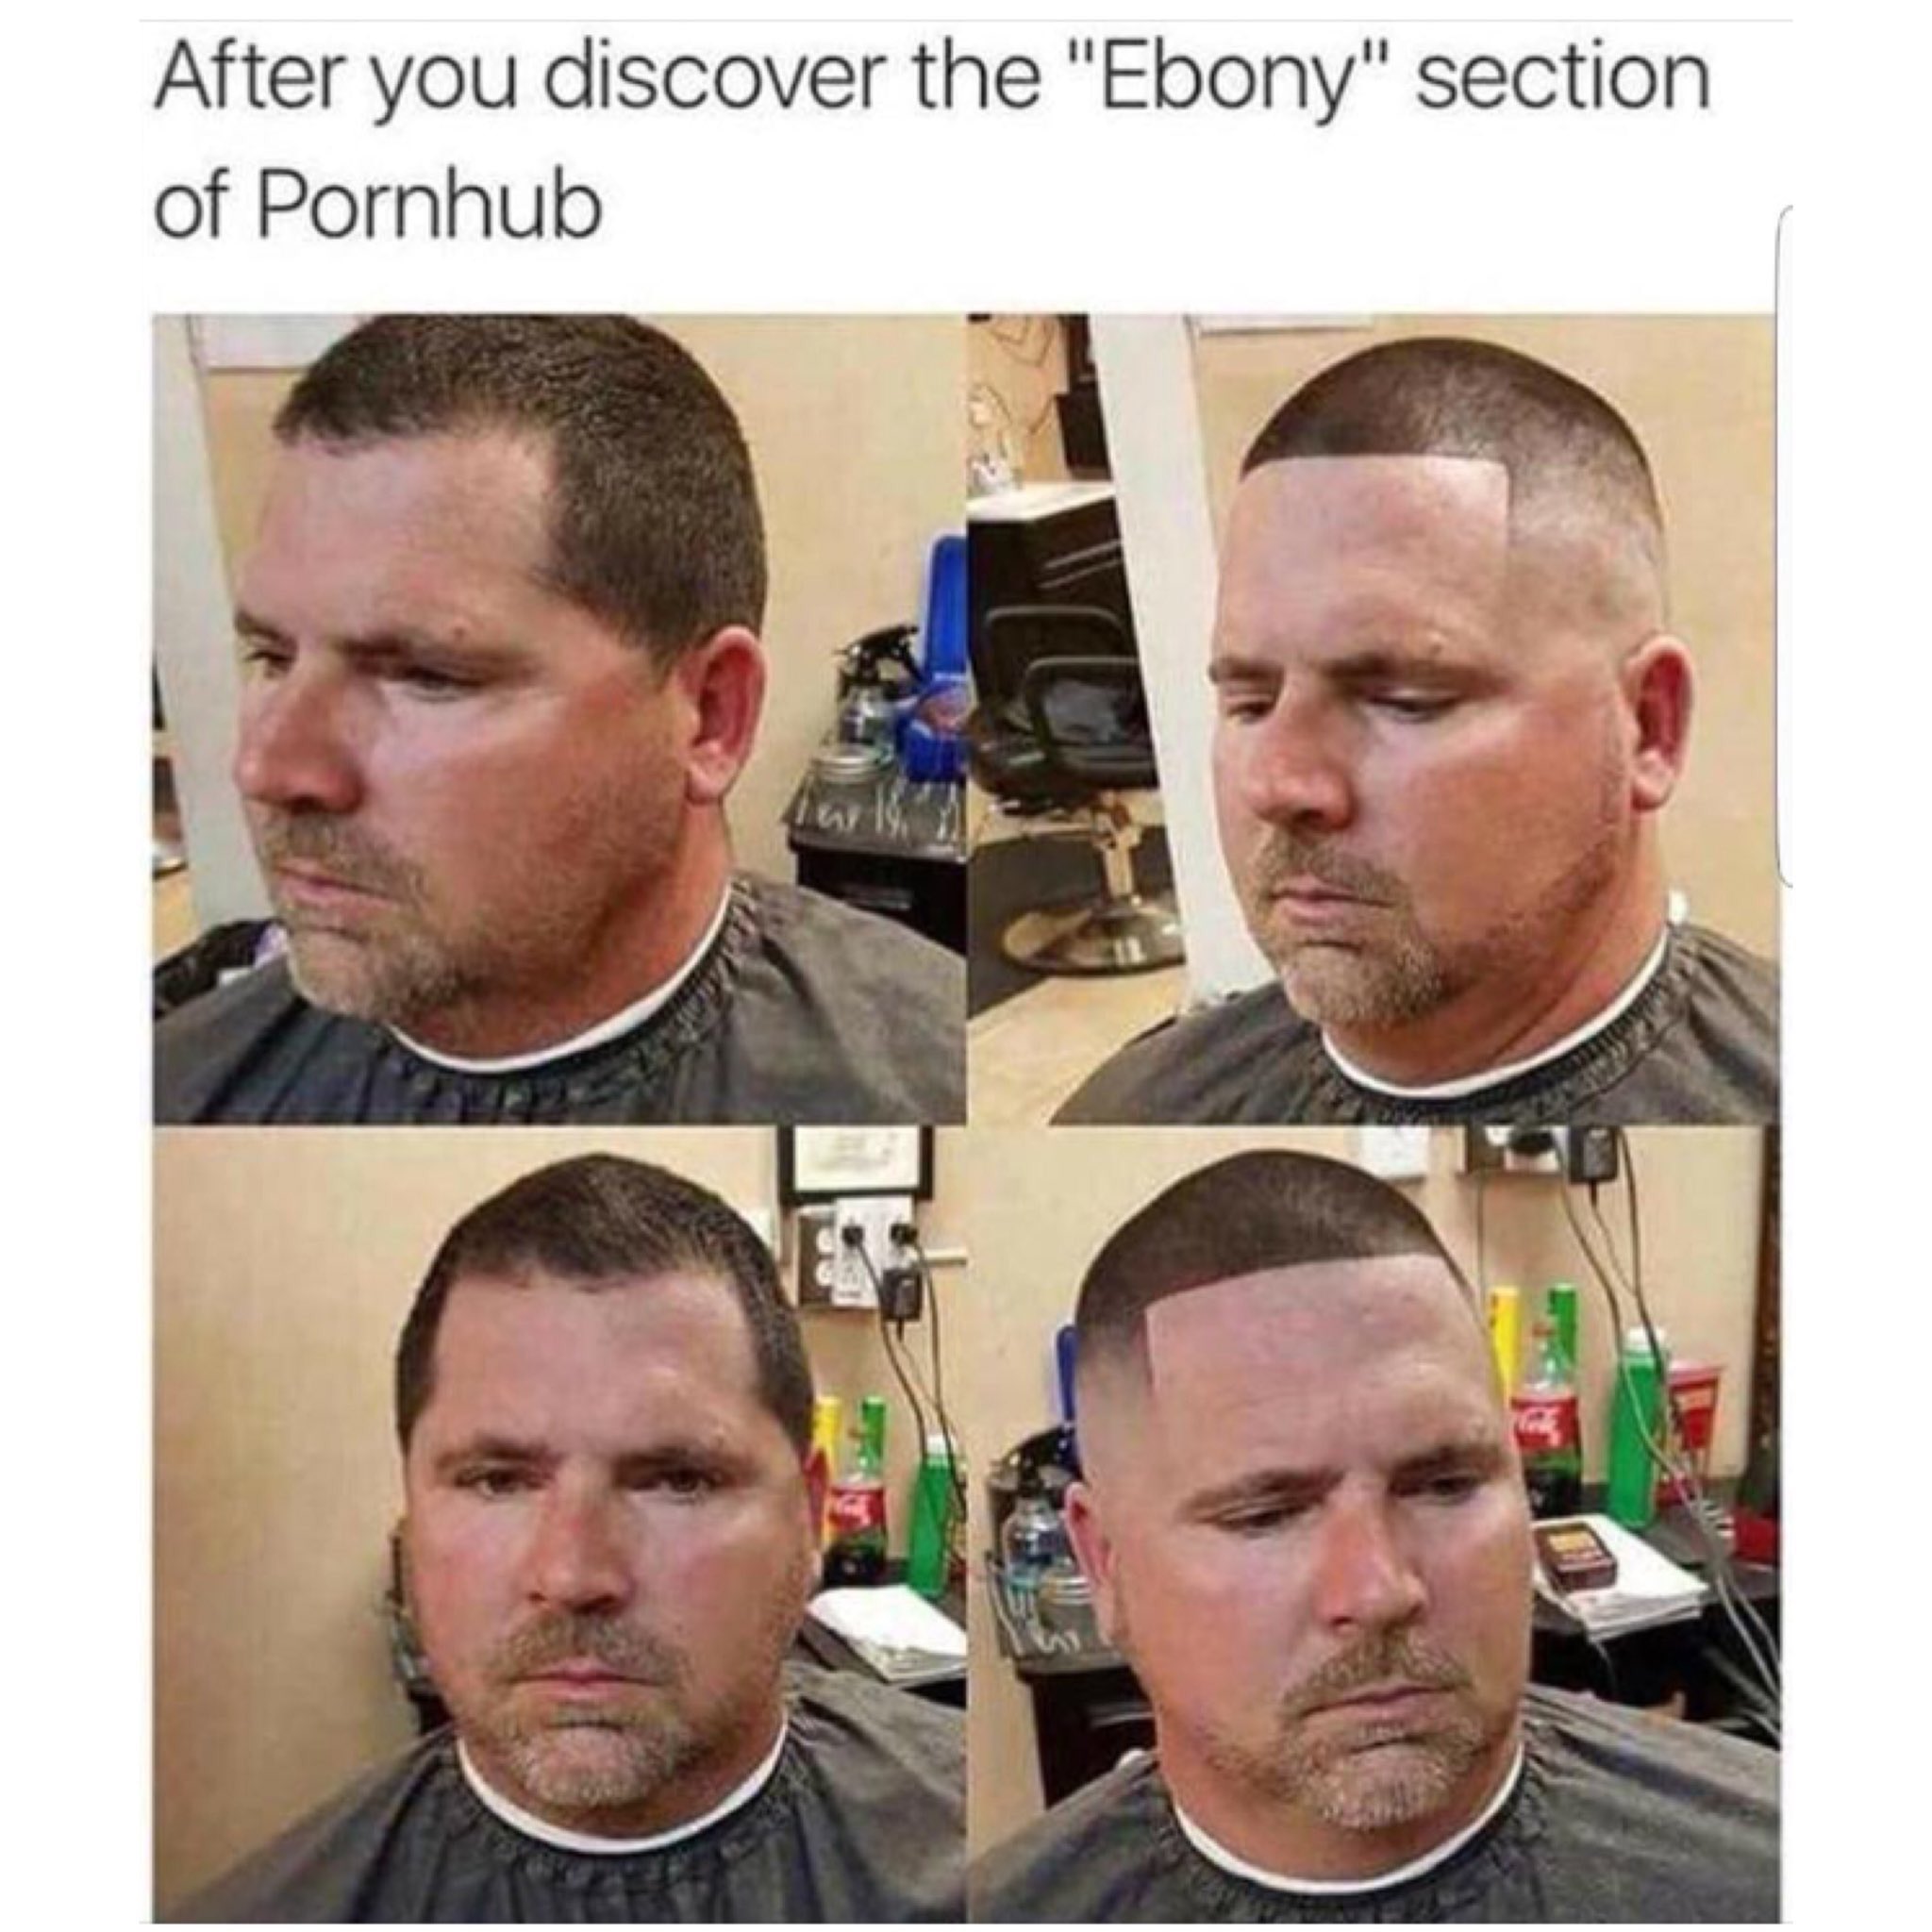 memes - you discover the ebony section - After you discover the "Ebony" section of Pornhub